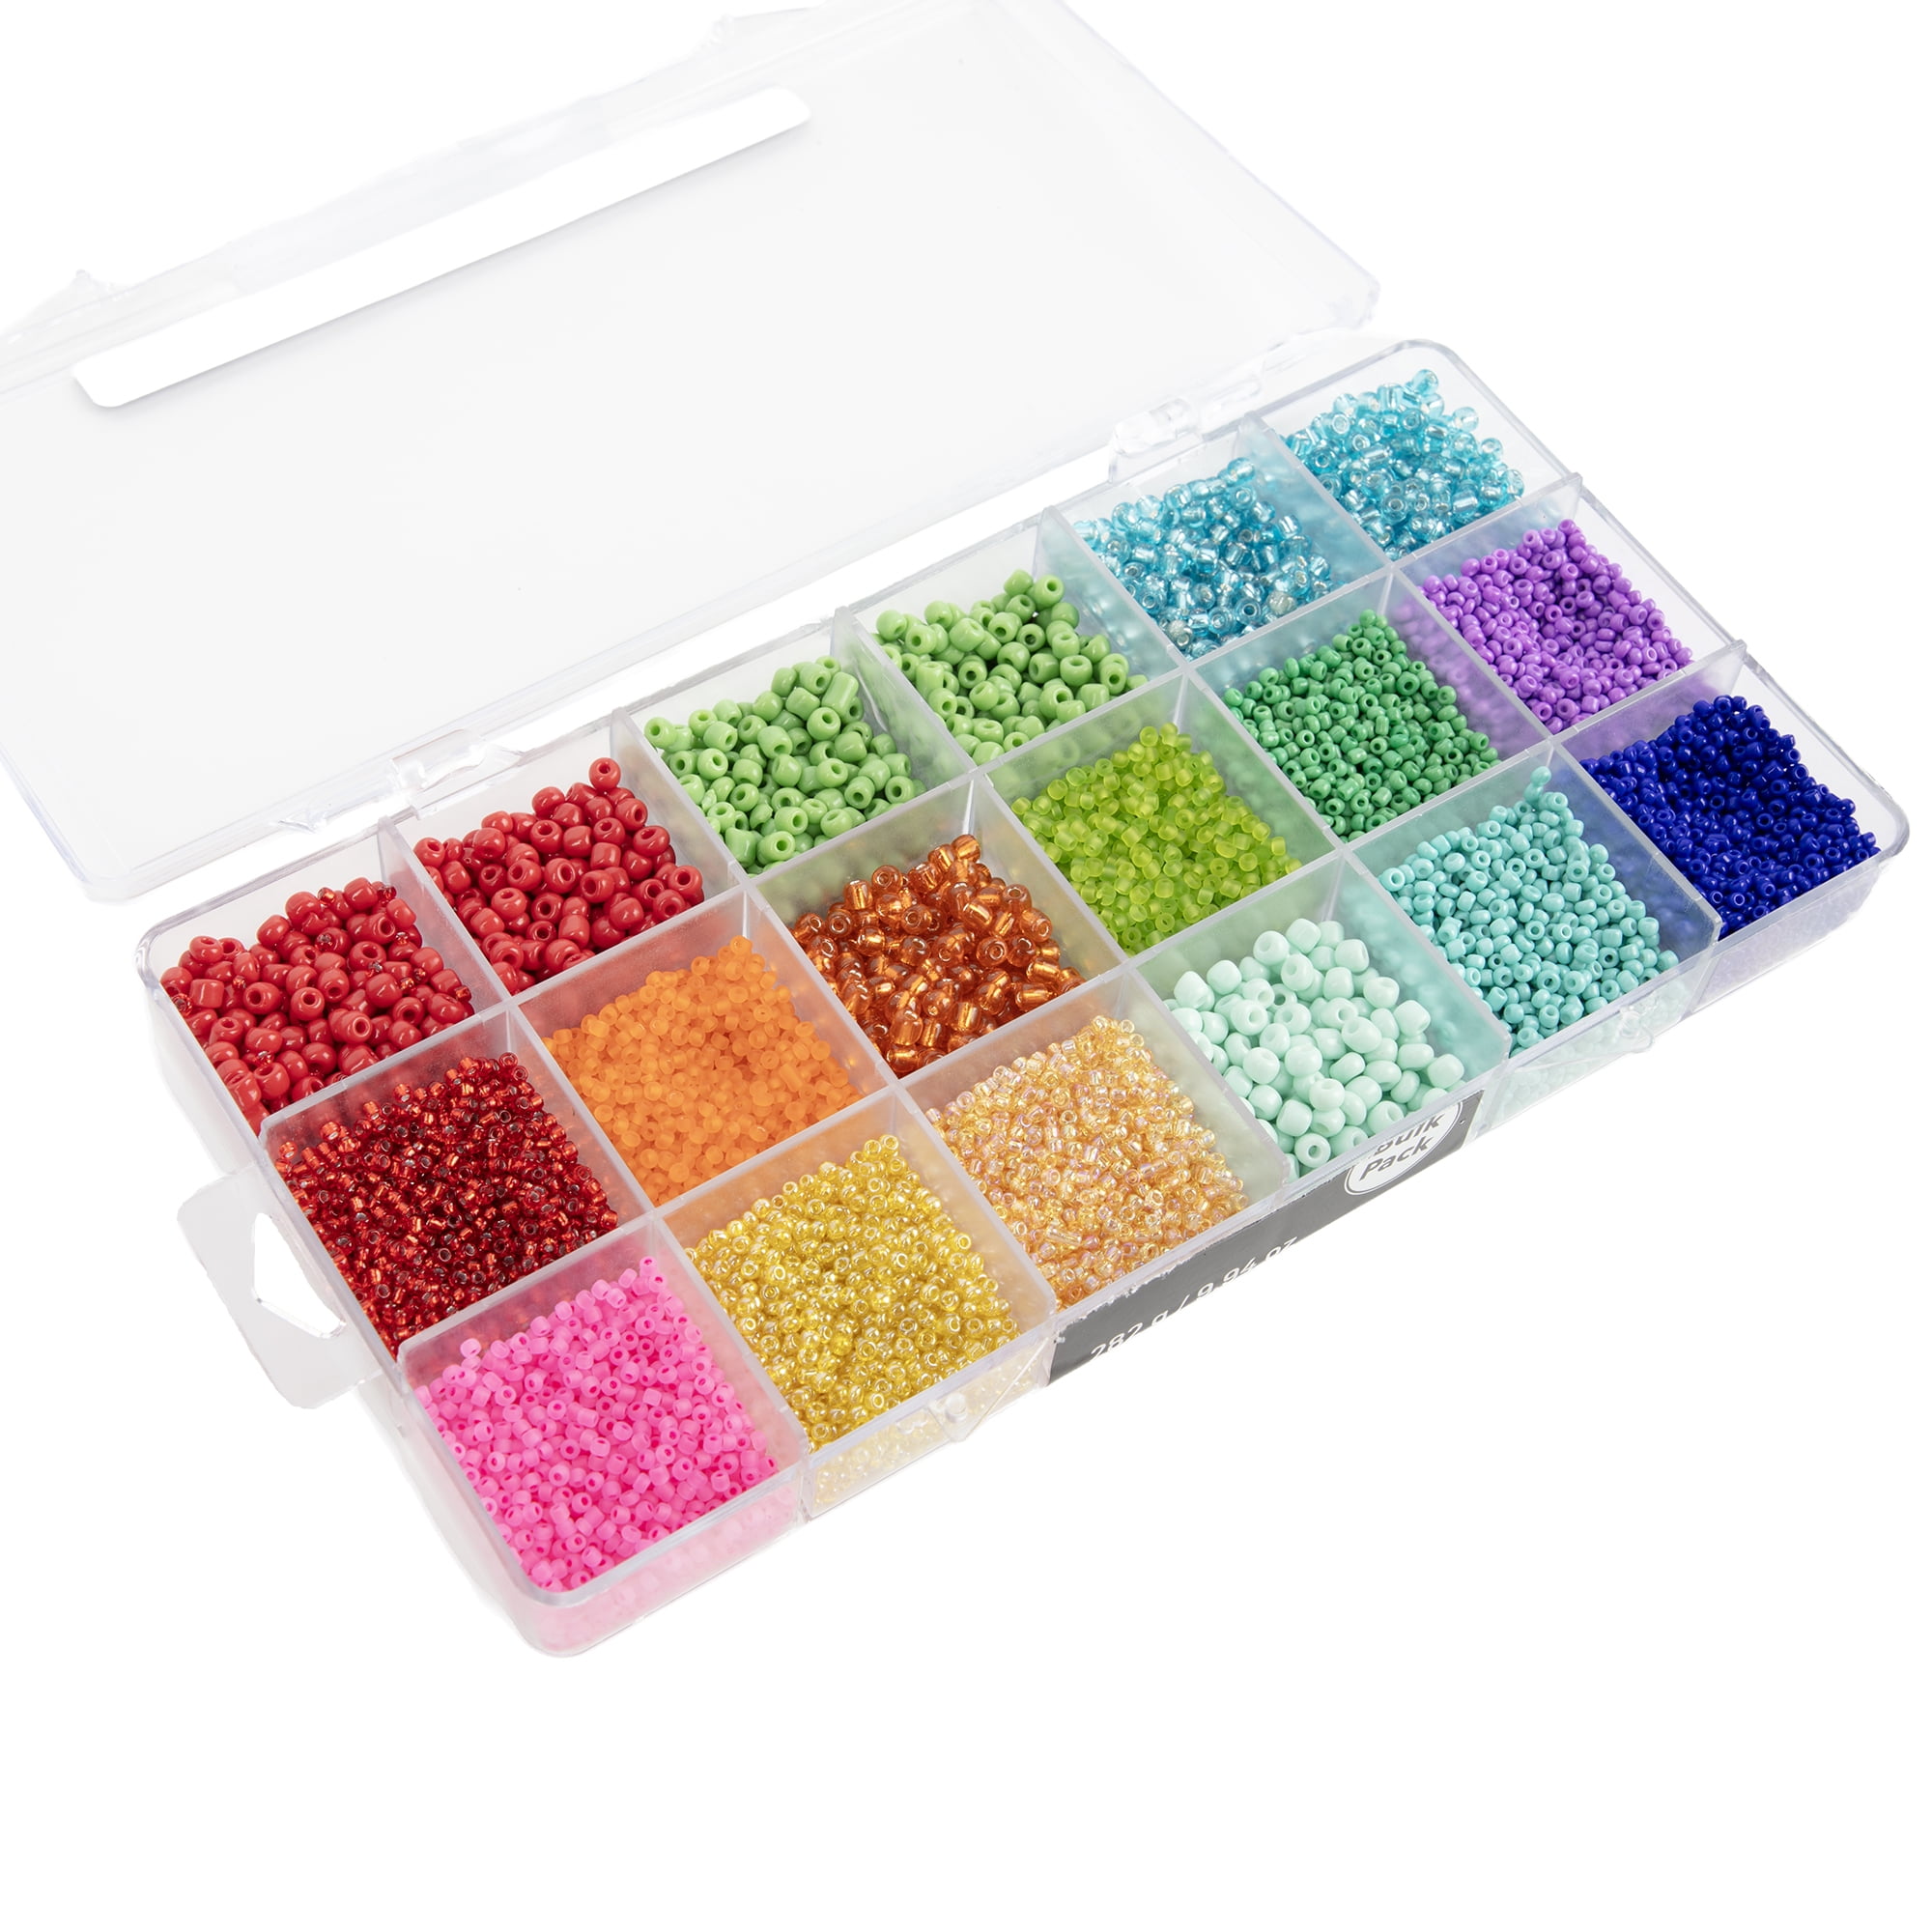 Cousin DIY Bright Rainbow Mix Glass Seed Bead Value Bulk Pack, Model  AJM65022009, 1000+ Pc, Colorful Unisex Beads for Adults